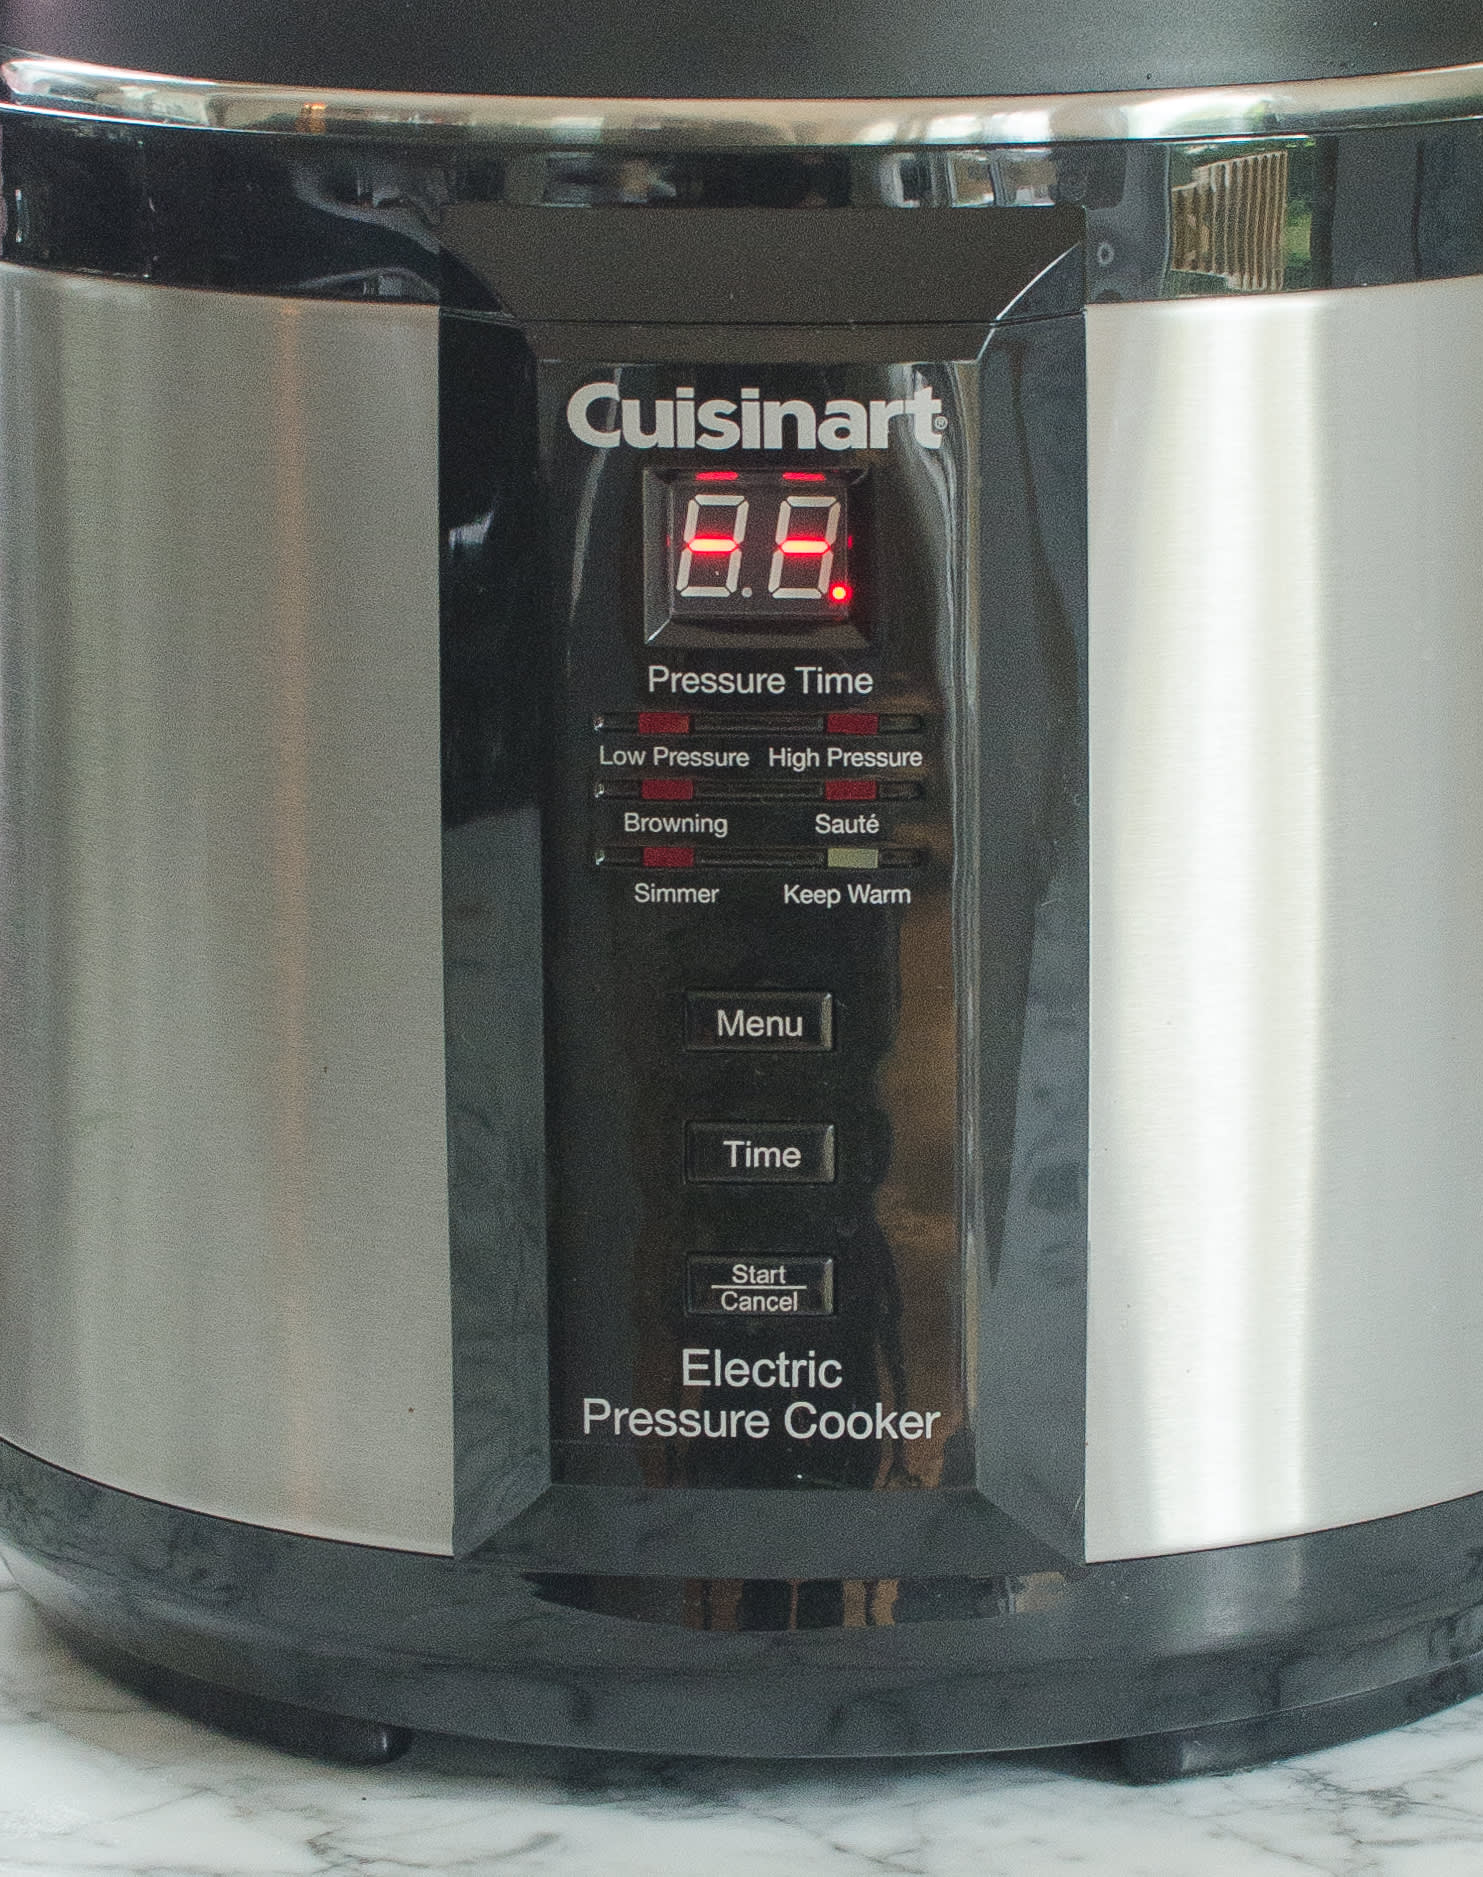 Product Review: Cuisinart Electric Pressure Cooker - Bachelor on the Cheap